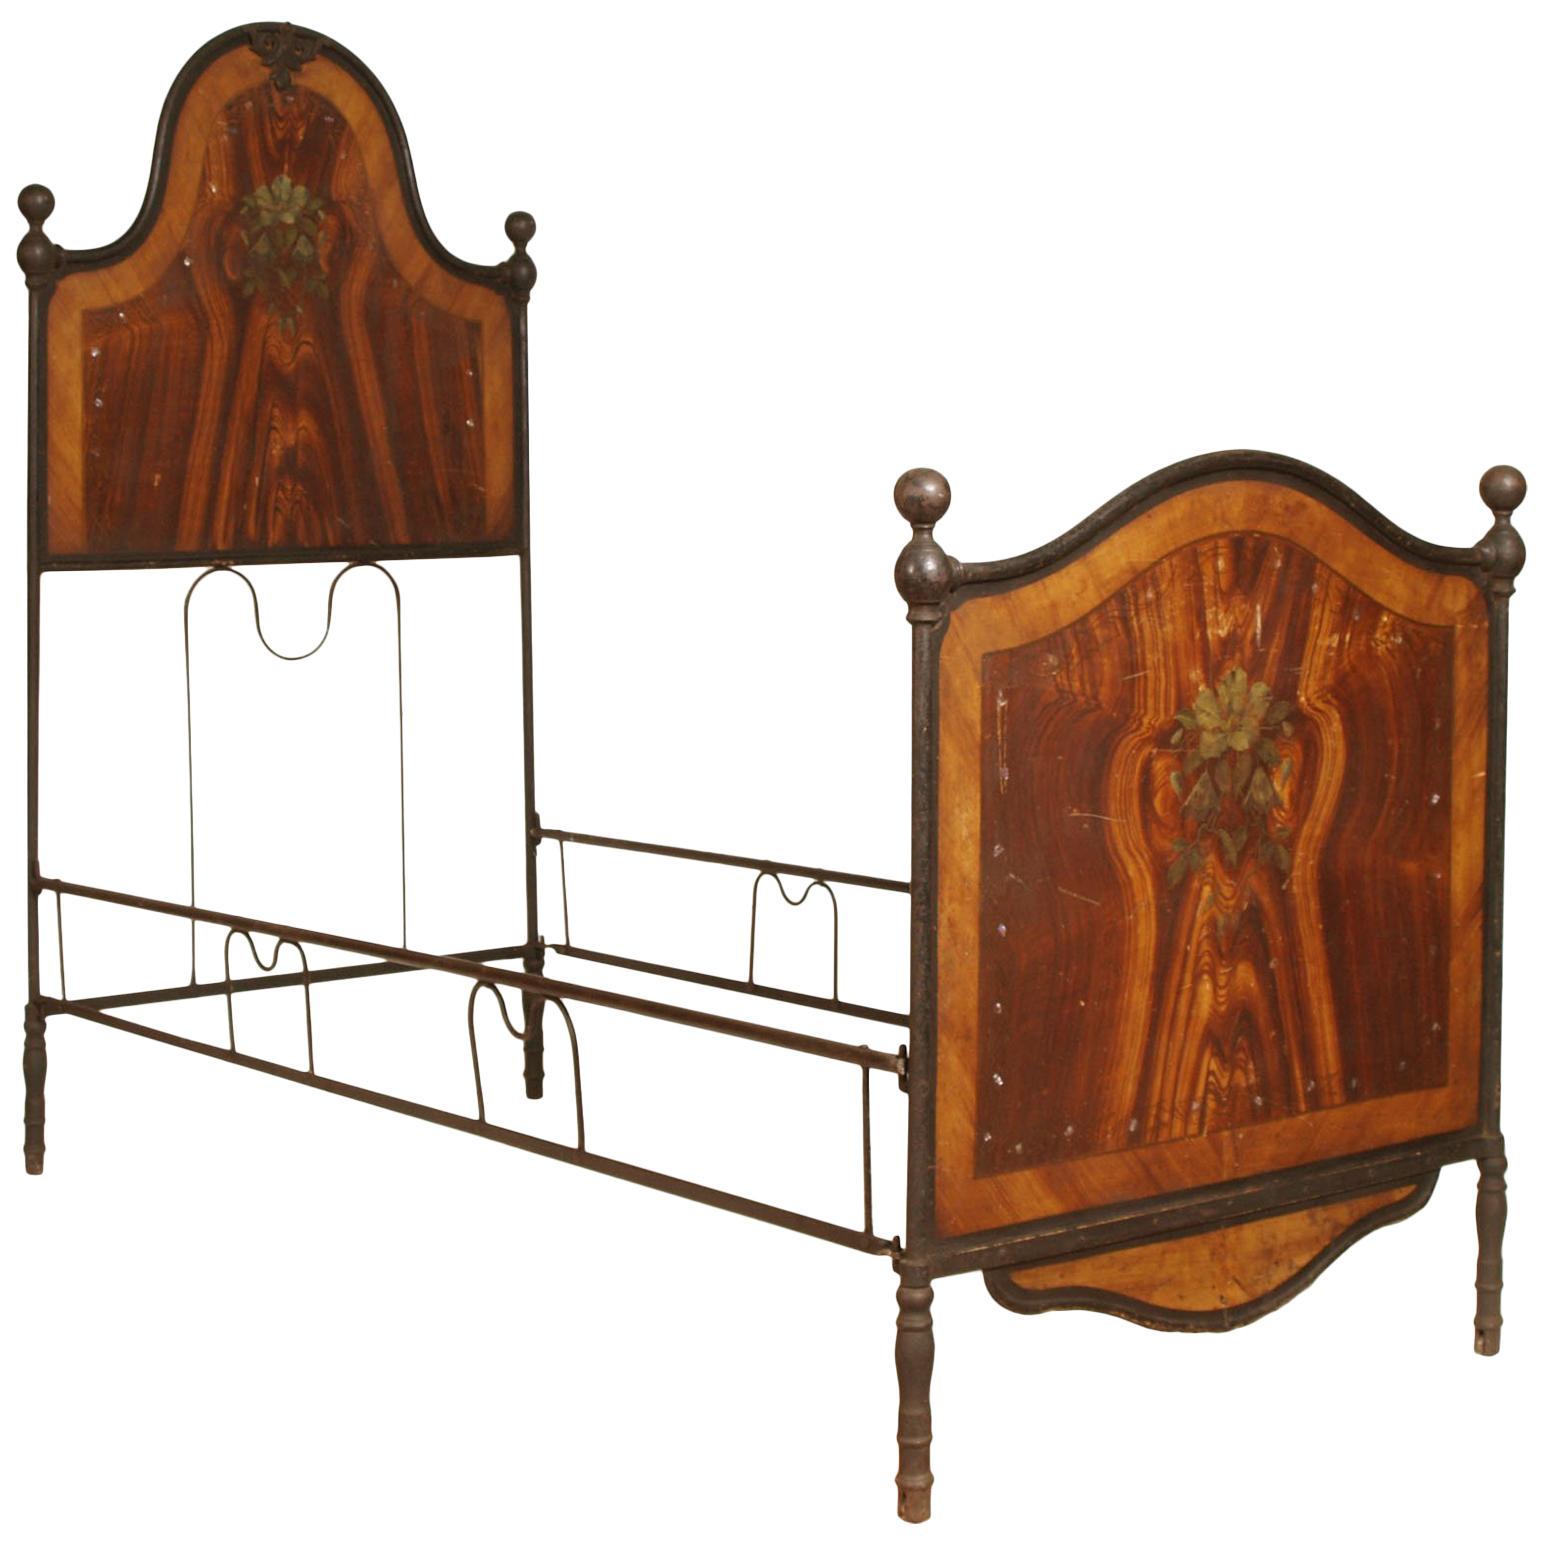 Italian 19th Century Bed Wrought Iron, Decorated with Mother of Pearl Scales